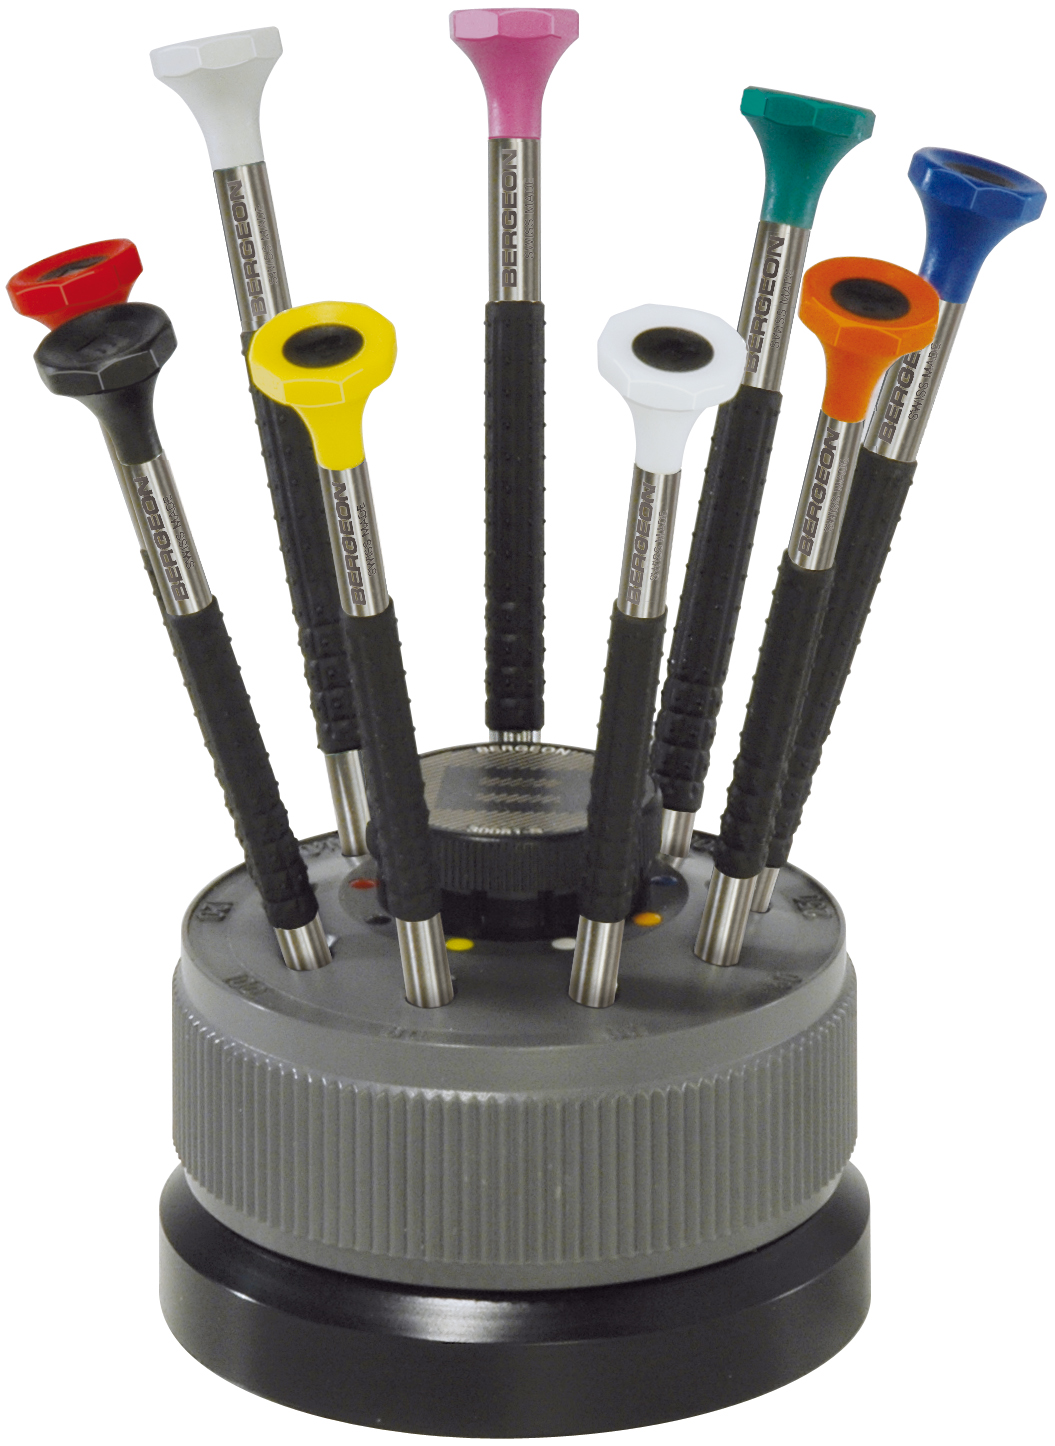 Screwdriver assortment, 9 pieces with Delrin handle on revolving base and stainless steel blades Bergeon